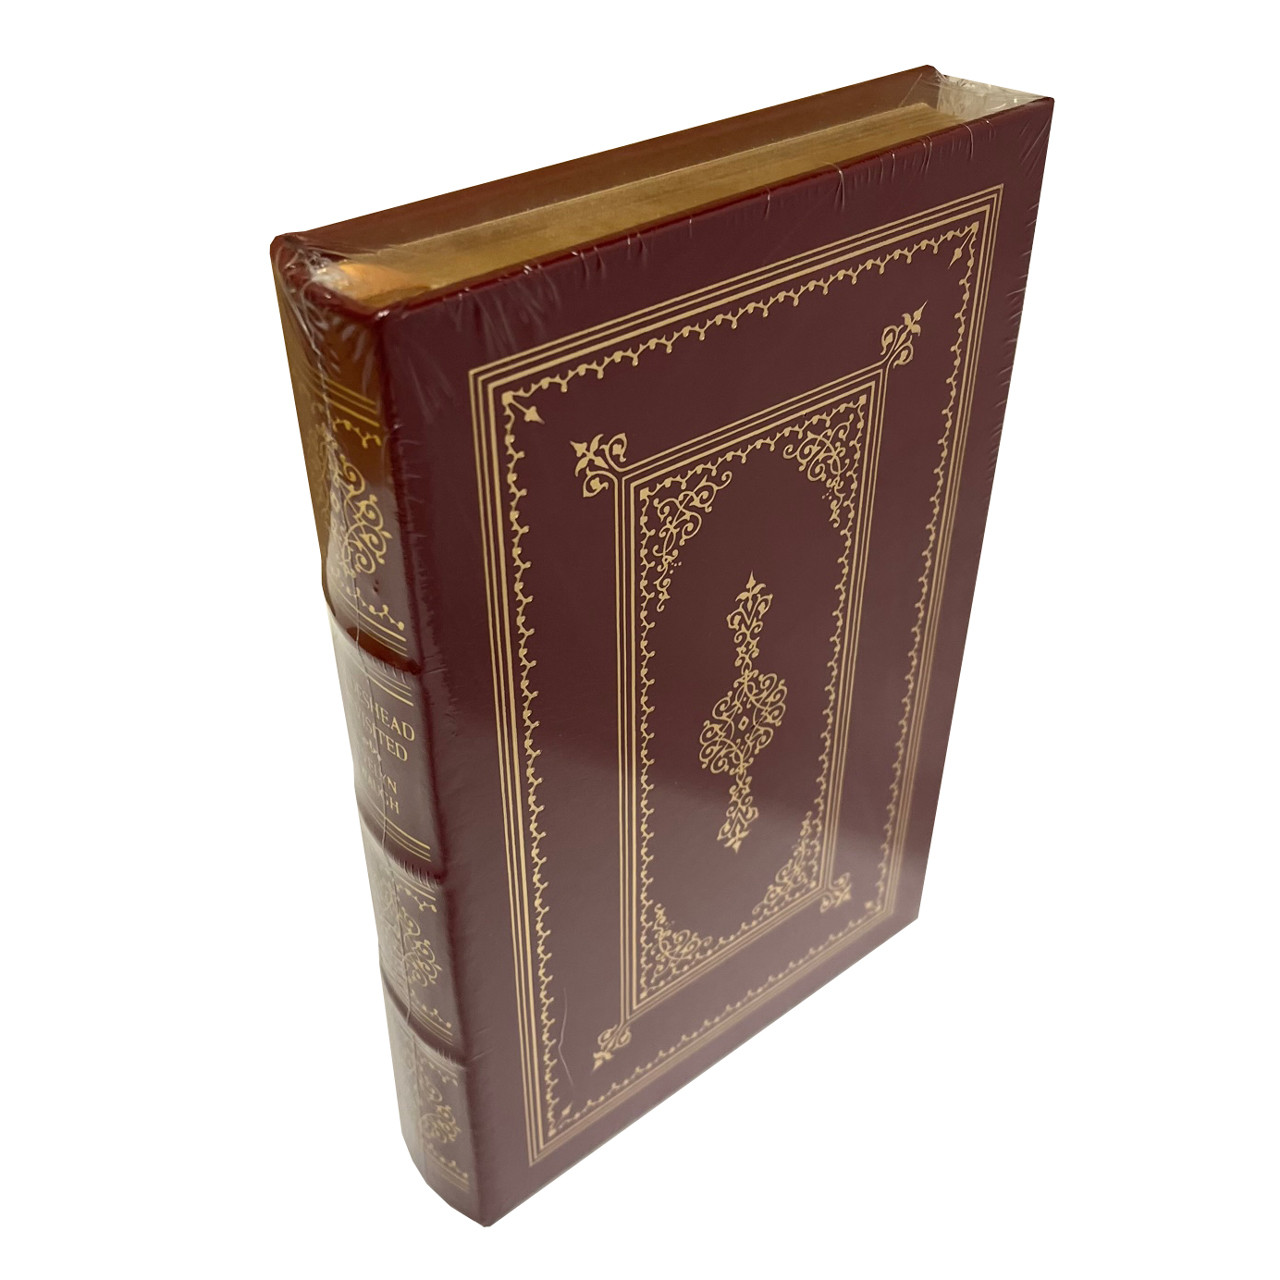 Evelyn Waugh "Brideshead Revisited" Leather Bound Collector's Edition w/Notes [Sealed]